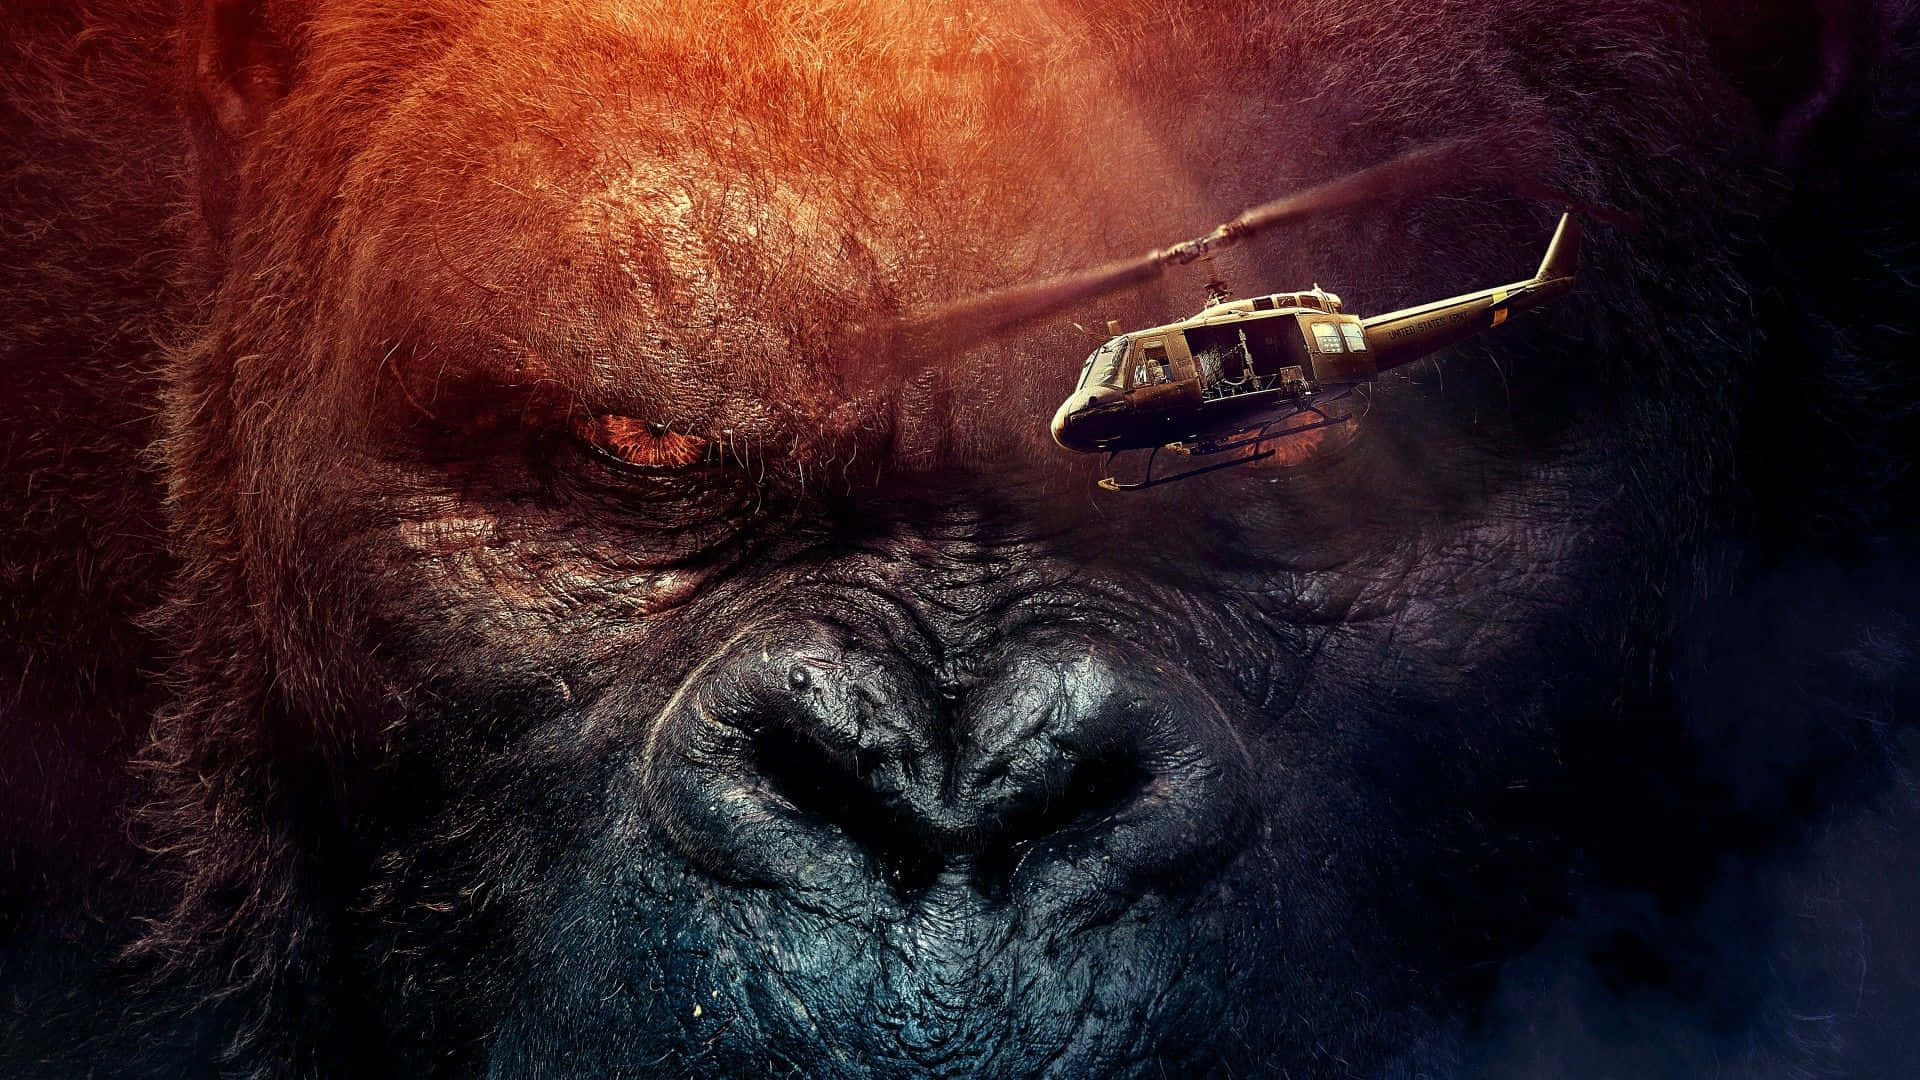 King Kong roars with intimidating power